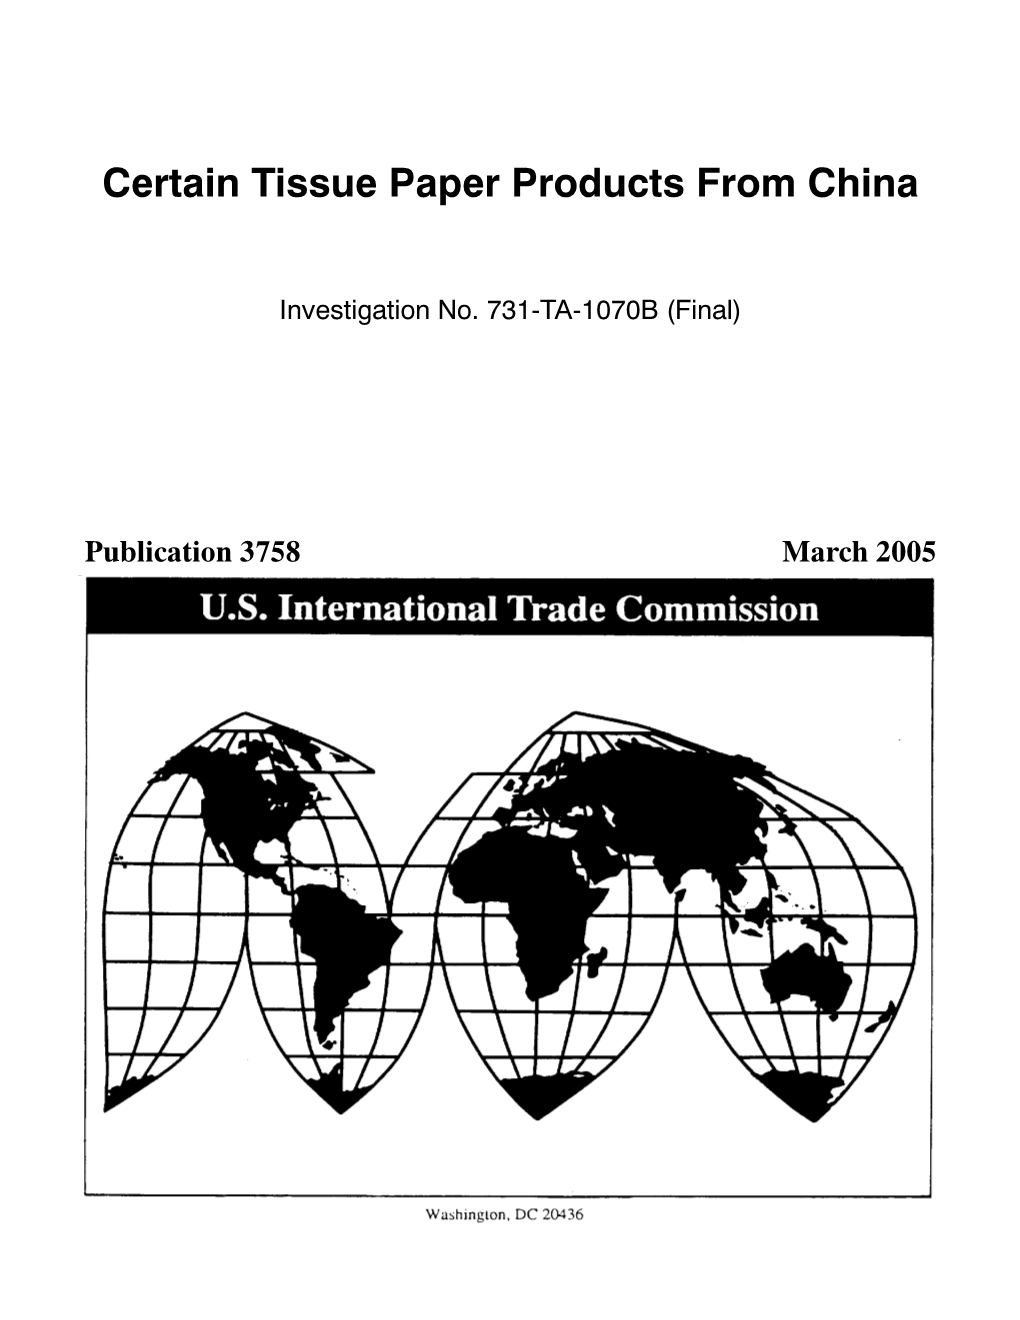 Certain Tissue Paper Products from China